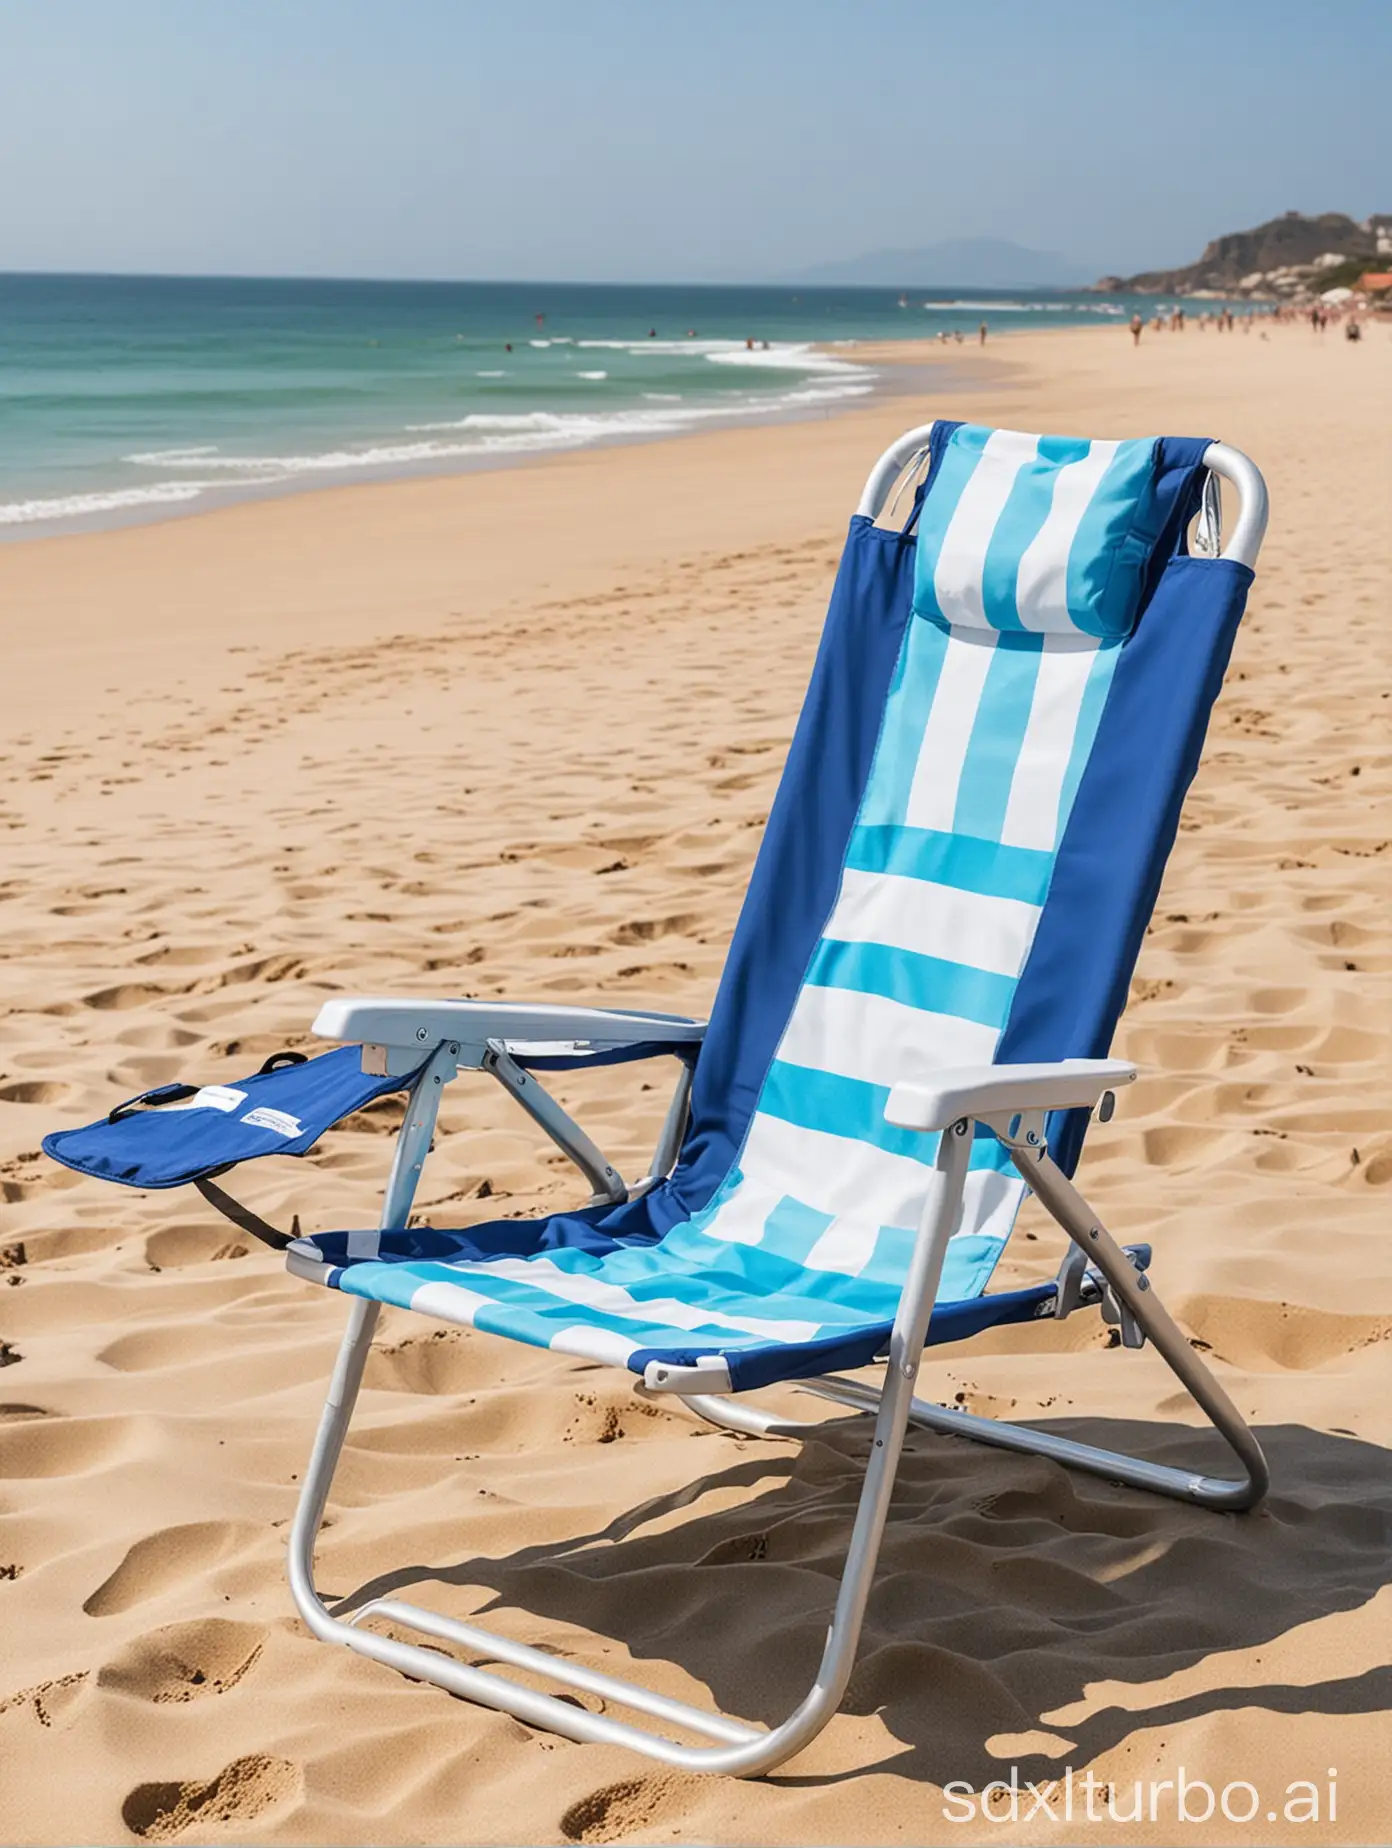 Comfortable-Folding-Beach-Chair-for-Adults-with-Carry-Bag-Extra-Wide-Seat-Chair-with-Pillow-Storage-Pocket-Blue